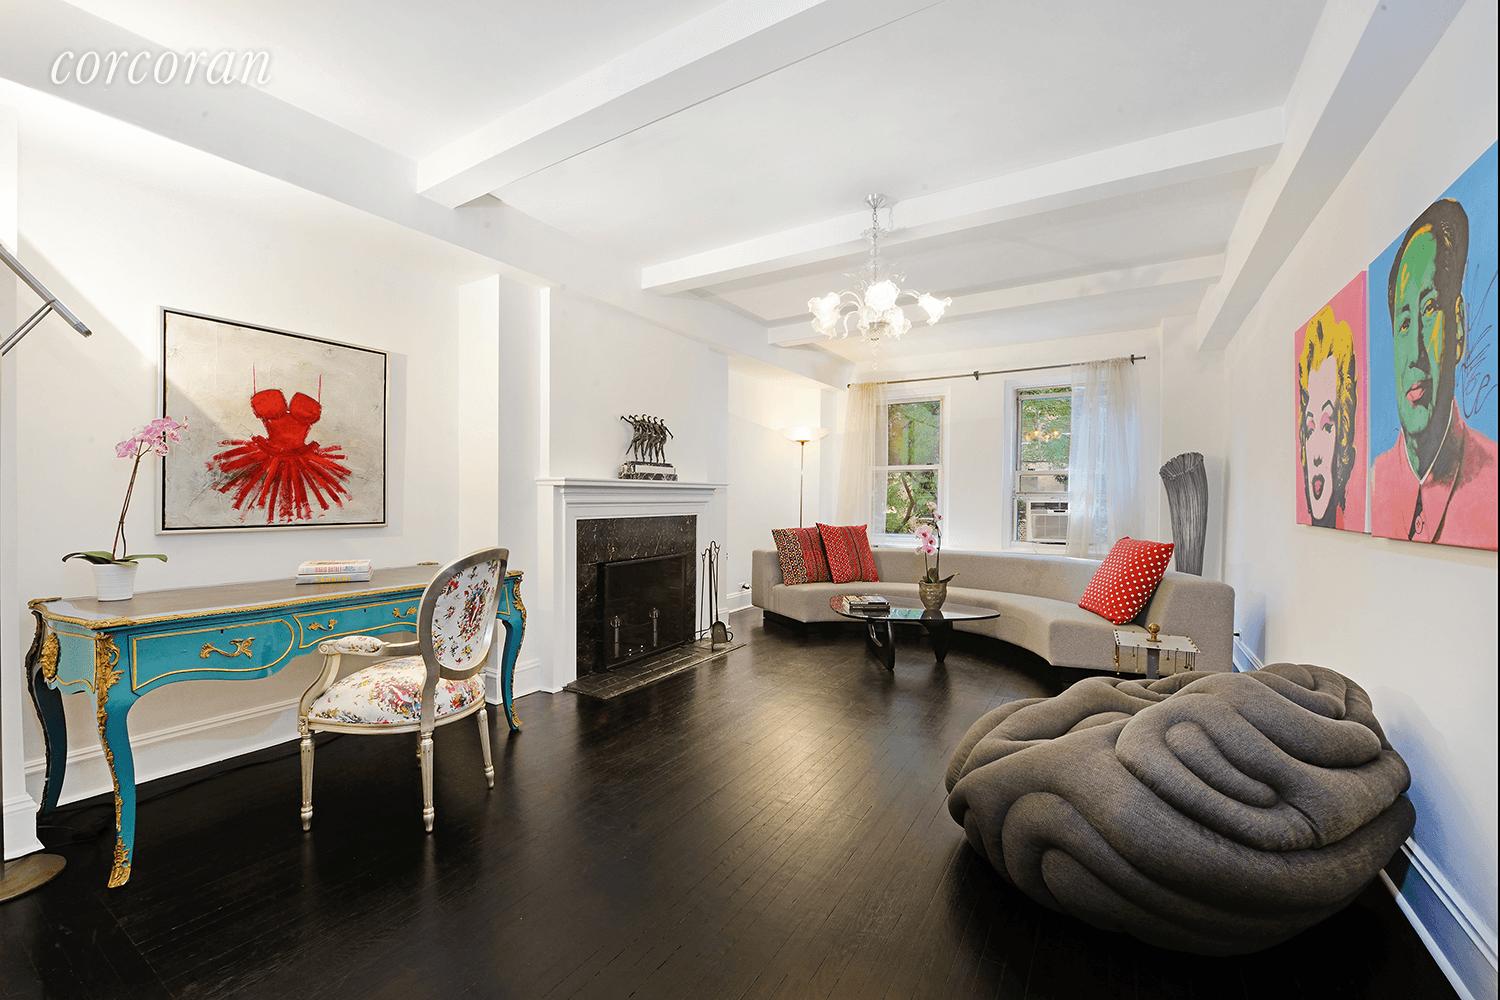 This sunny, quiet, and beautifully proportioned two bedroom, two bathroom home or pied a terre at 75 Central Park West offers the elegance, scale, and detail of prewar architecture balanced ...